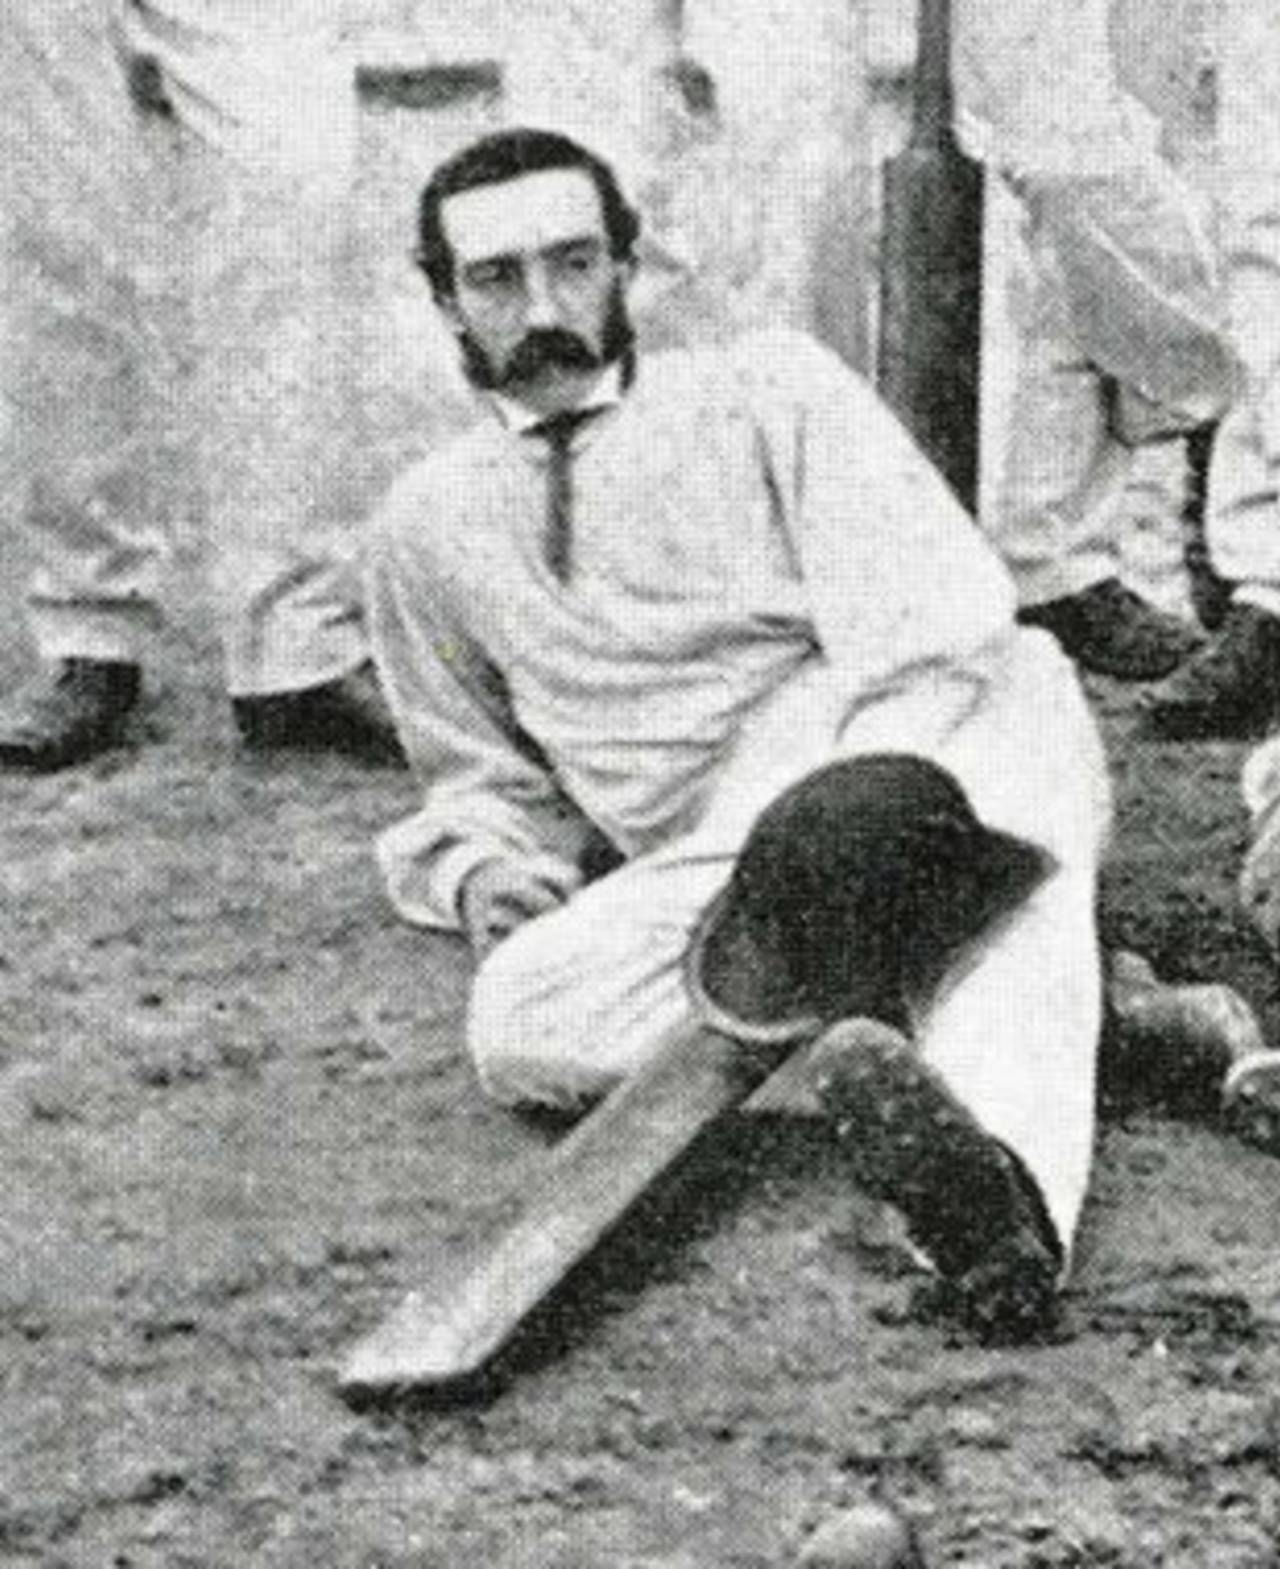 <I>Wisden</I> on George Summers: "No professional cricketer ever left us who in life was more highly respected and whose death was more deeply deplored"&nbsp;&nbsp;&bull;&nbsp;&nbsp;'Cricket' magazine